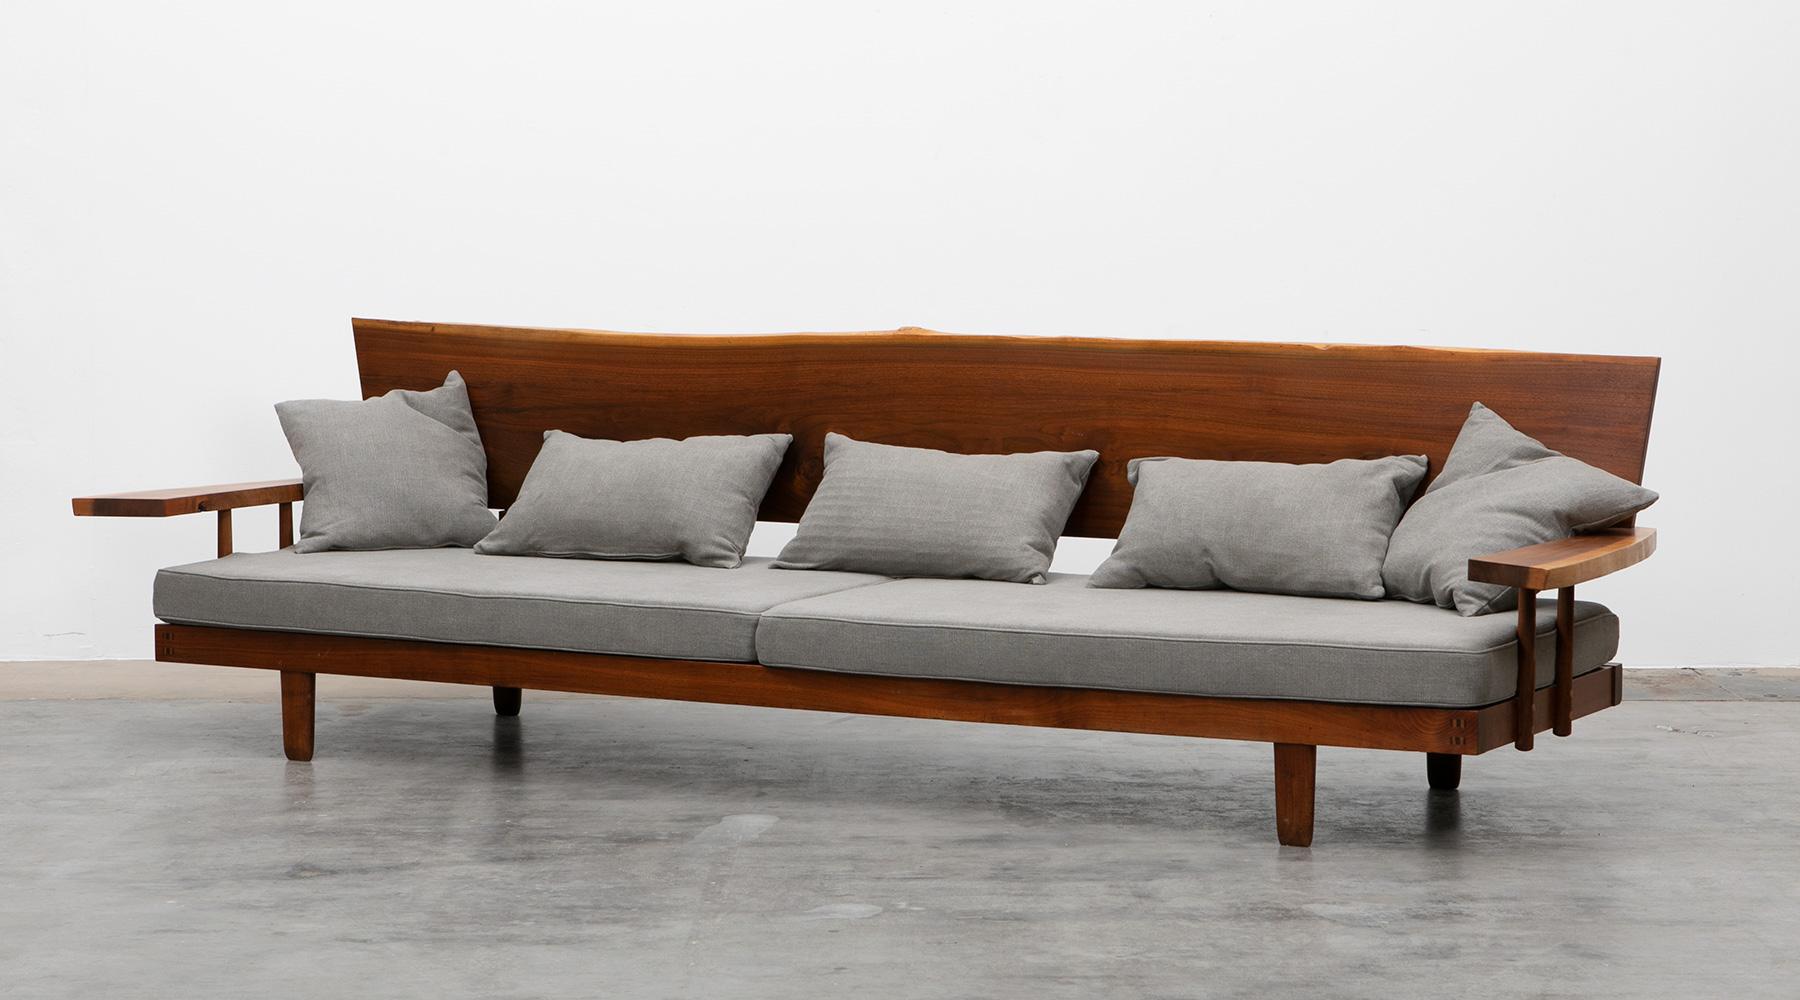 Sofa by George Nakashima, American walnut, new upholstery, USA, 1960.

Handcrafted, stunning, marvellous sofa. It is constructed with American walnut with handwork by George Nakashima himself. 

By that, it’s being a great example of Nakashima's